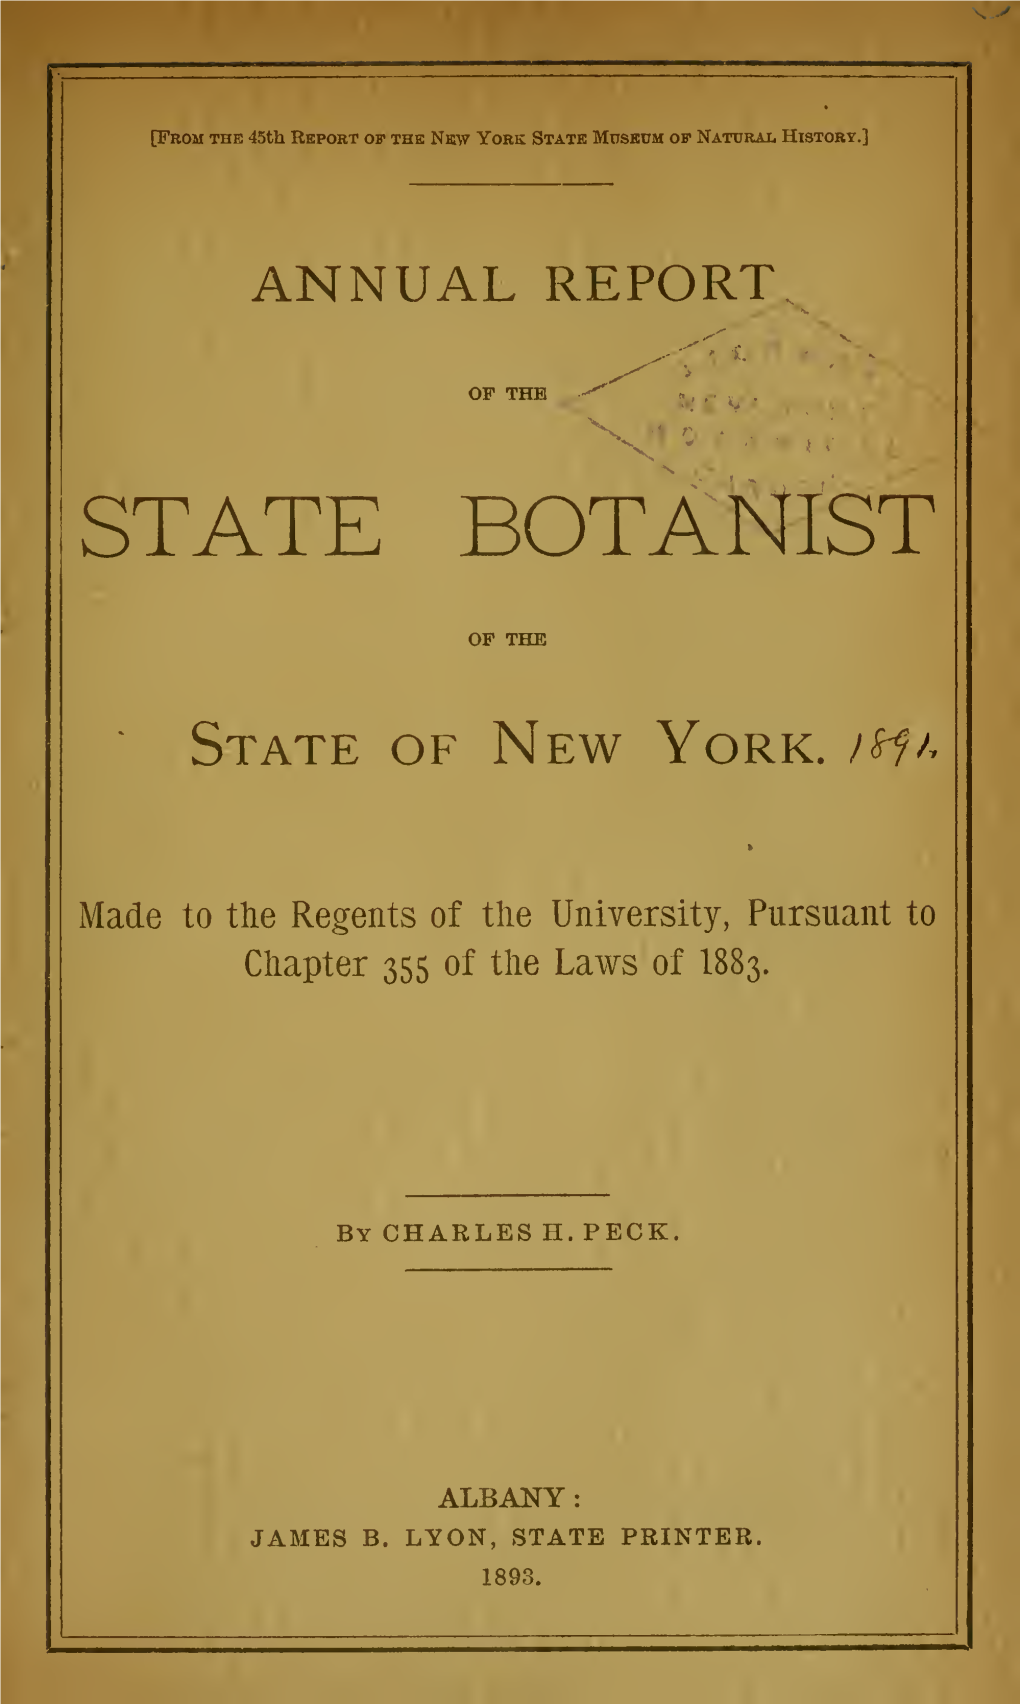 Annual Report of the State Botanist 1891